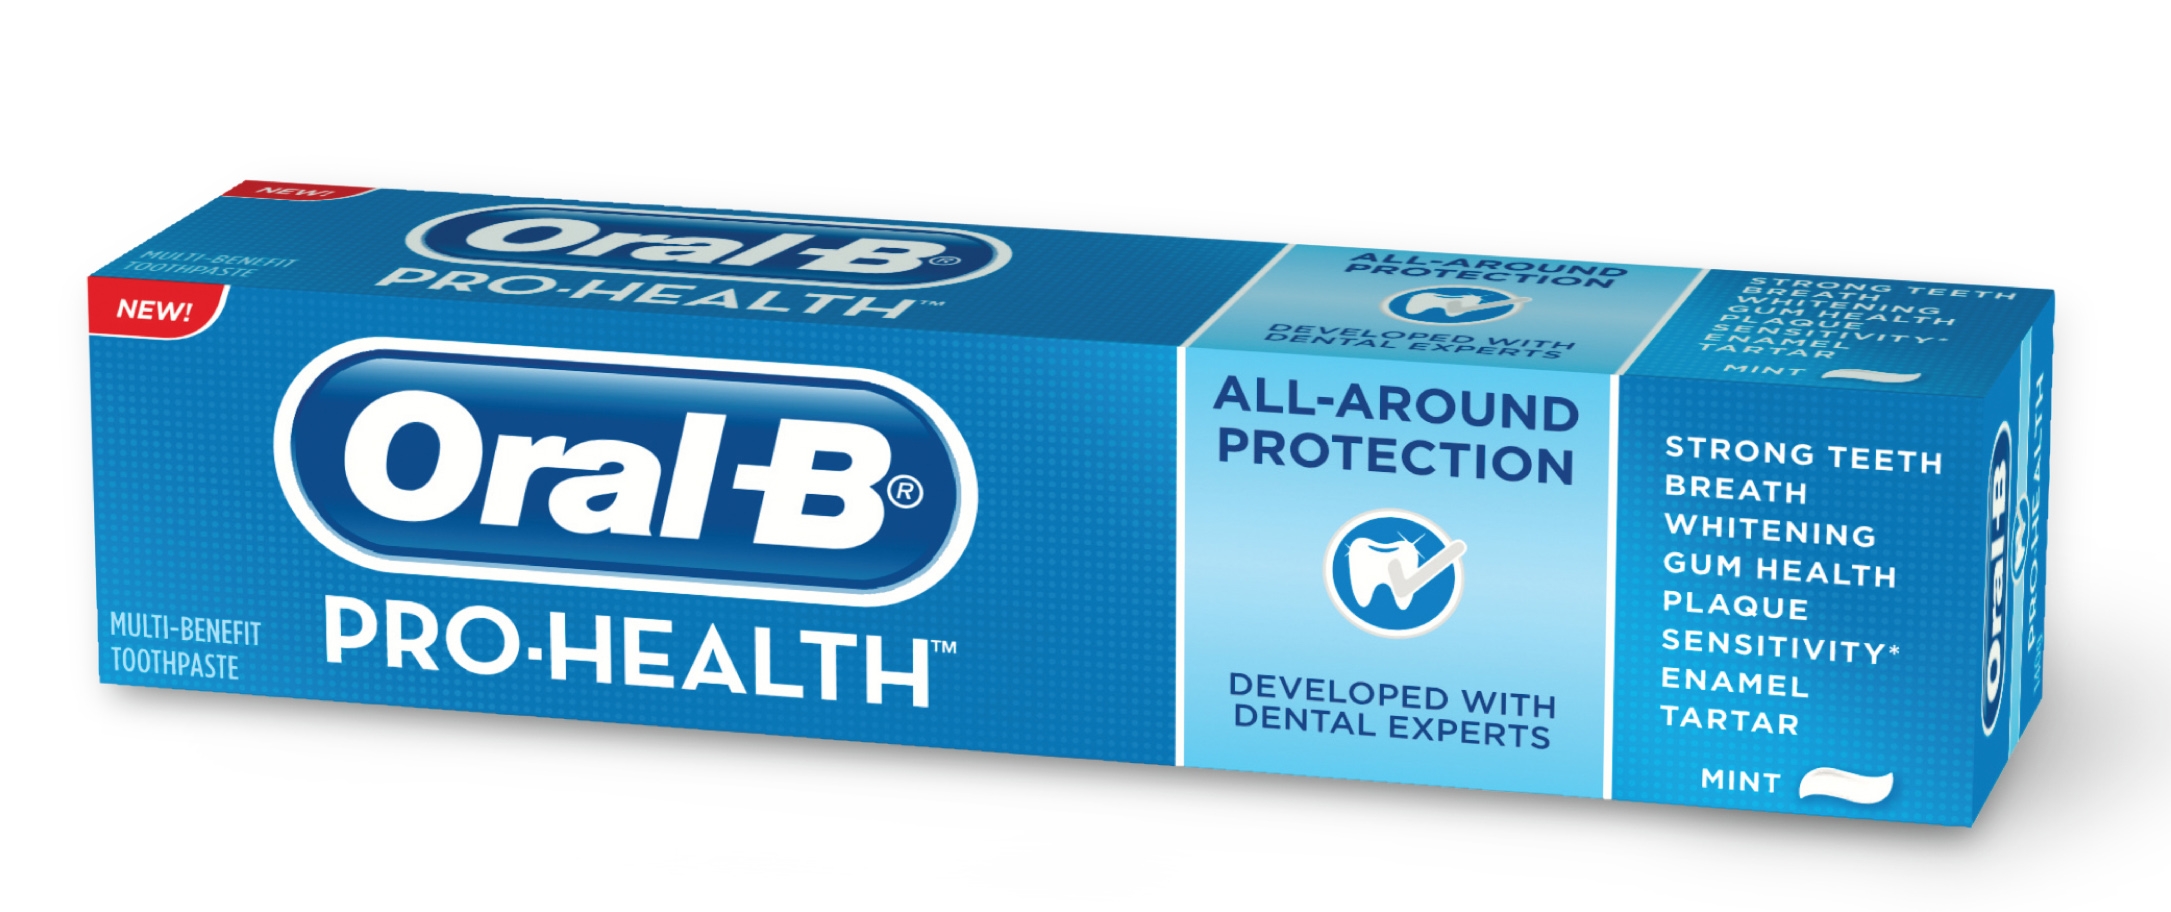 Review: Is Oral B Pro Health A Multi-Benefit Toothpaste?